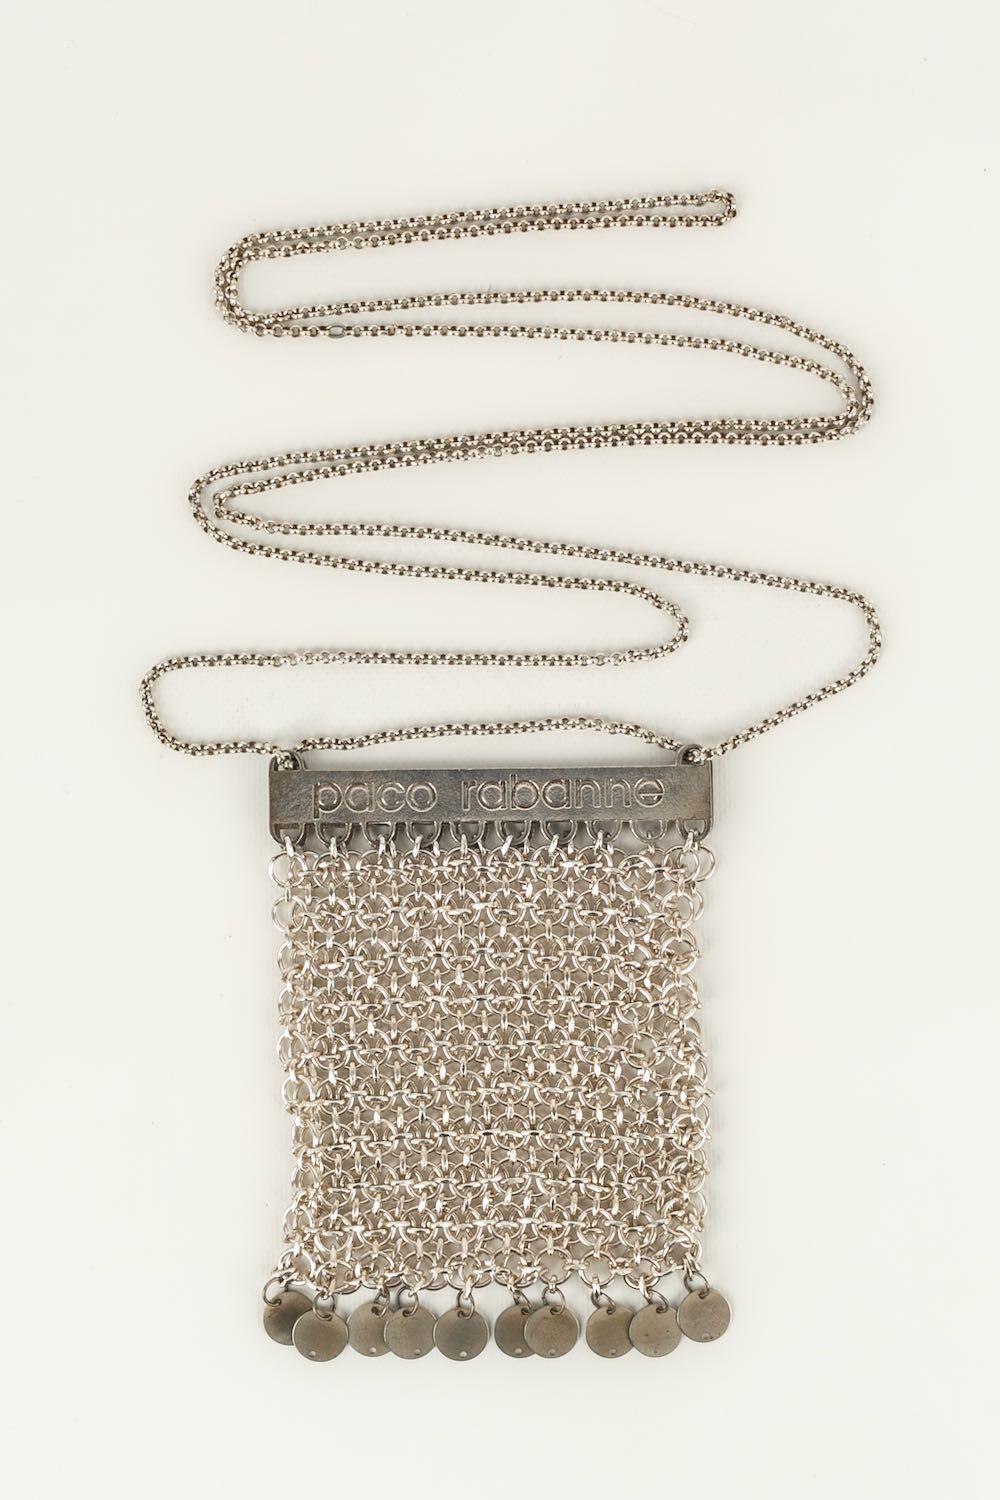 Paco Rabanne - Small flexible bag in silver-plated metal link.

Additional information: 
Dimensions: Height: 14.5 cm, Width: 12.5 cm, Handle: about 180 cm
Condition: Very good condition
Seller Ref number: S166
